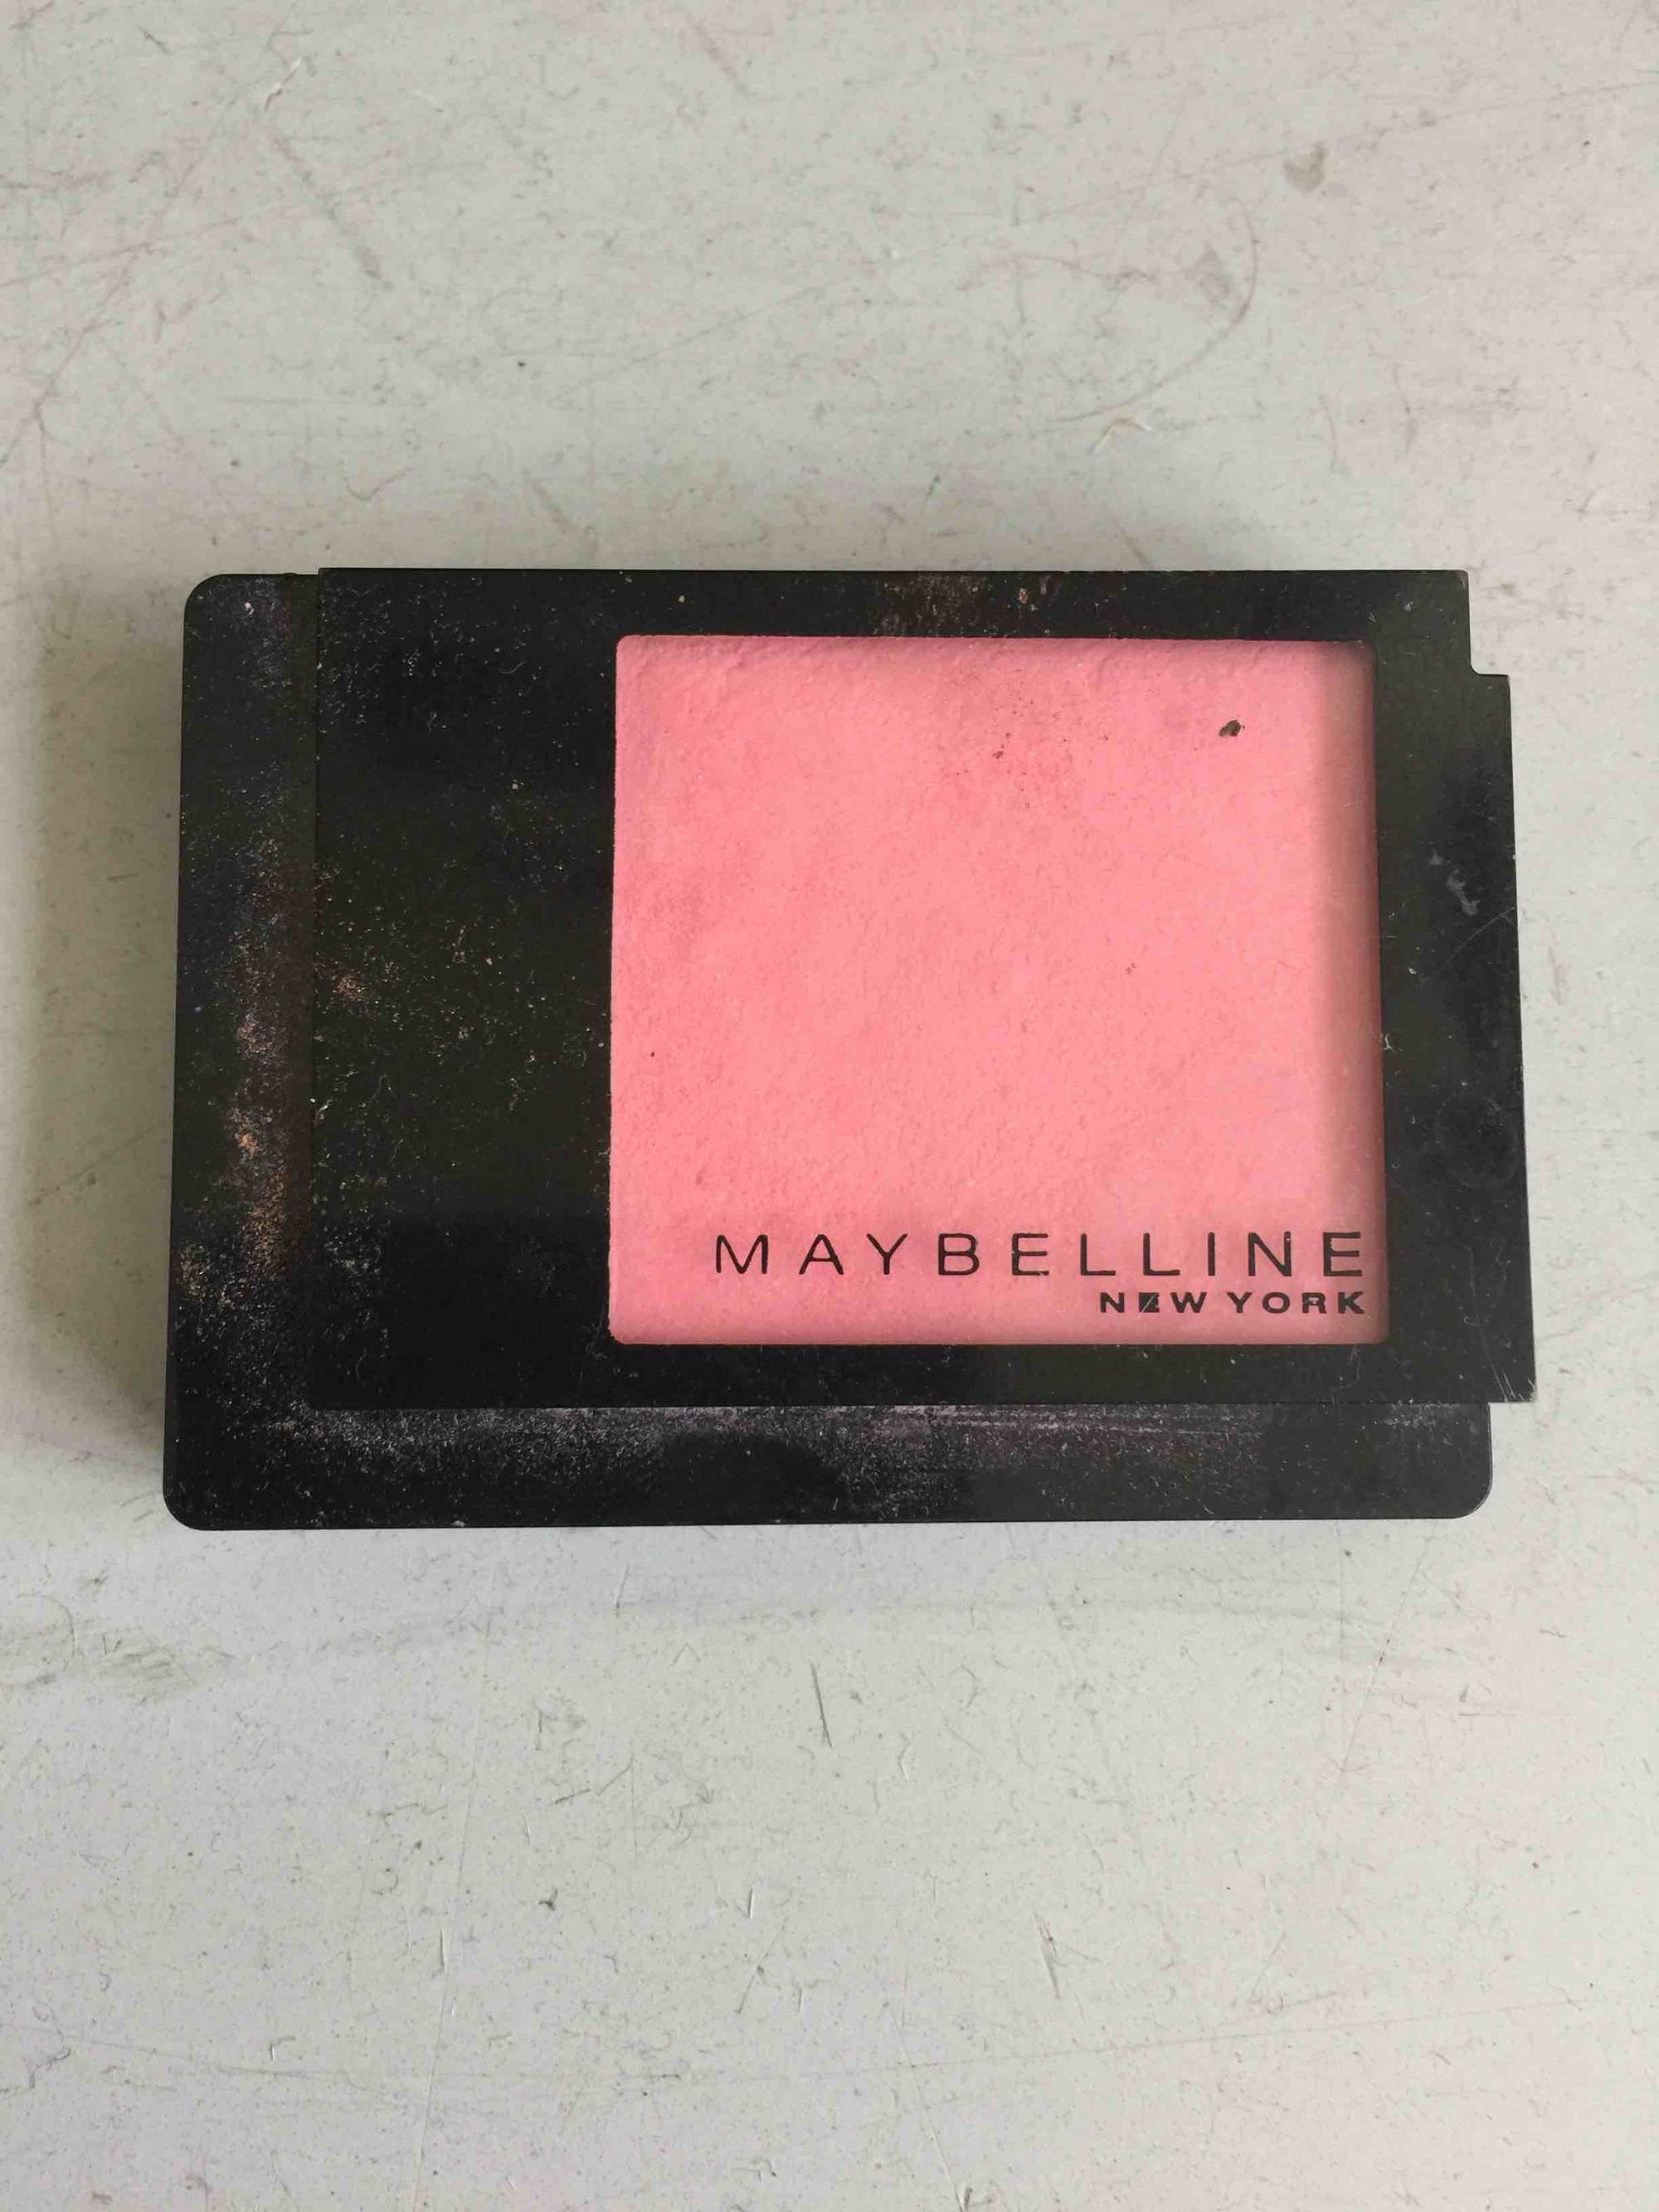 Maybelline Face Studio Blush, 80 Dare To Pink by Maybelline